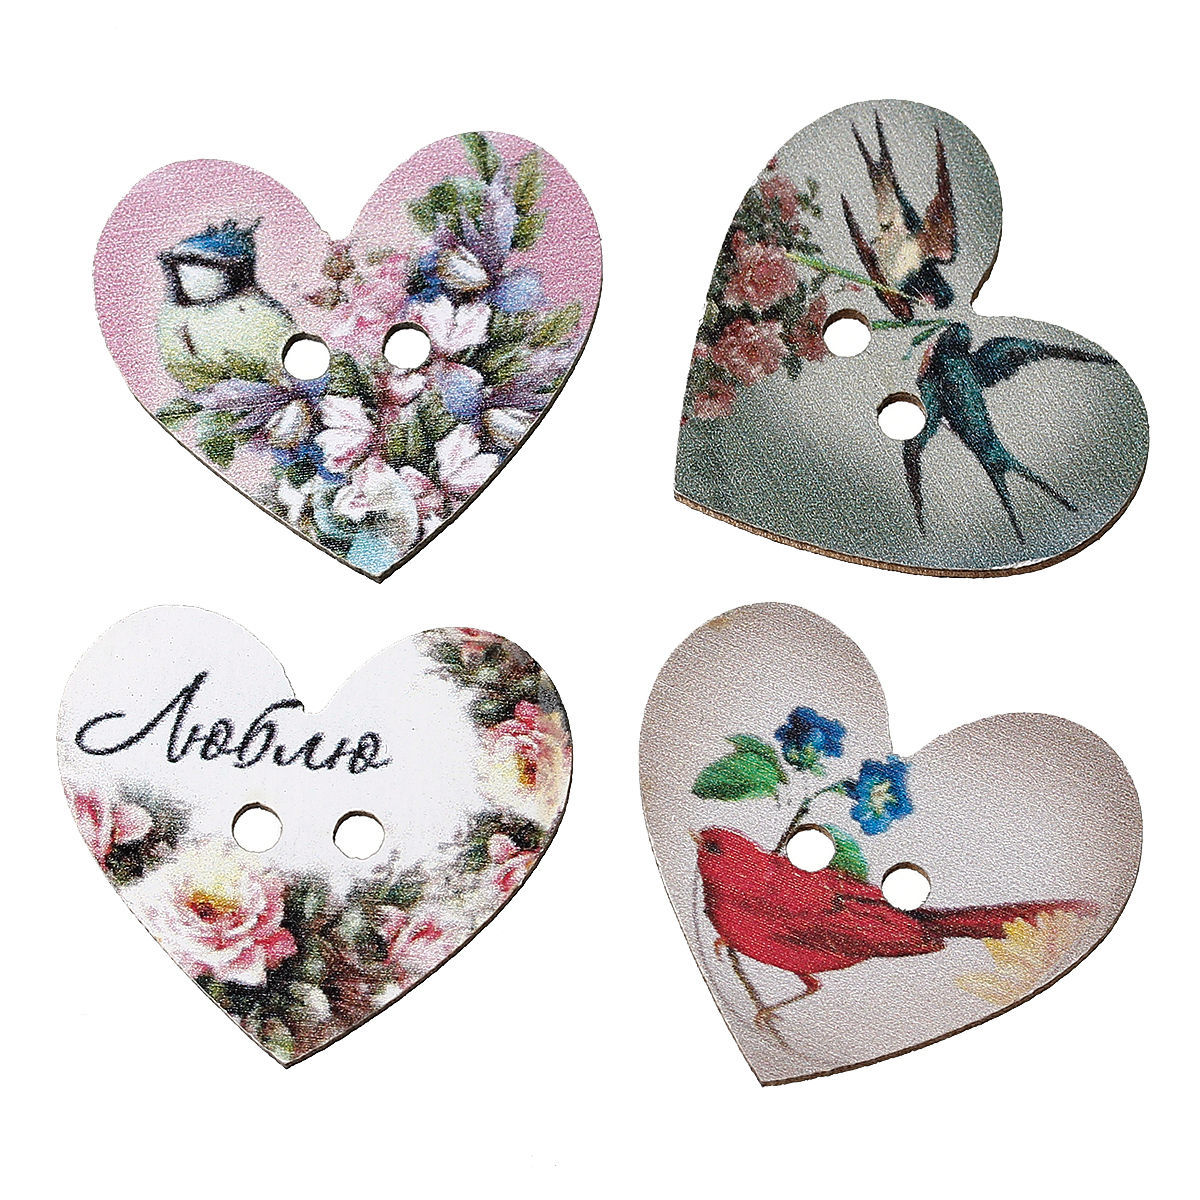 Picture of Wood Sewing Buttons Scrapbooking Heart At Random 2 Holes Flower Pattern 28mm(1 1/8") x 24mm(1"), 5 PCs